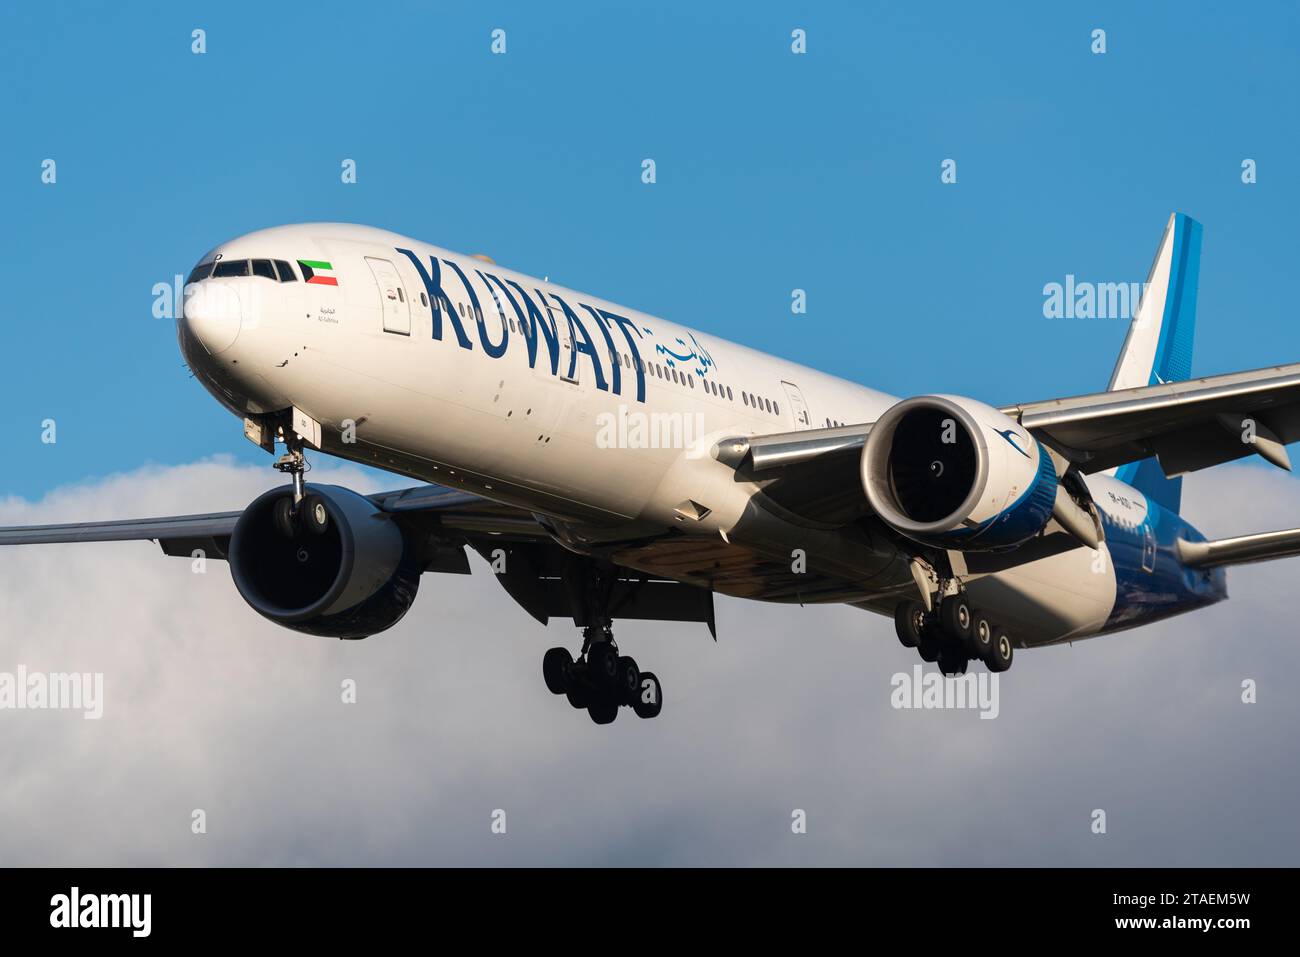 Kuwait Airways Boeing 777-300/ER airliner jet plane 9K-AOD on finals to land at London Heathrow Airport, UK, in late afternoon winter sun Stock Photo